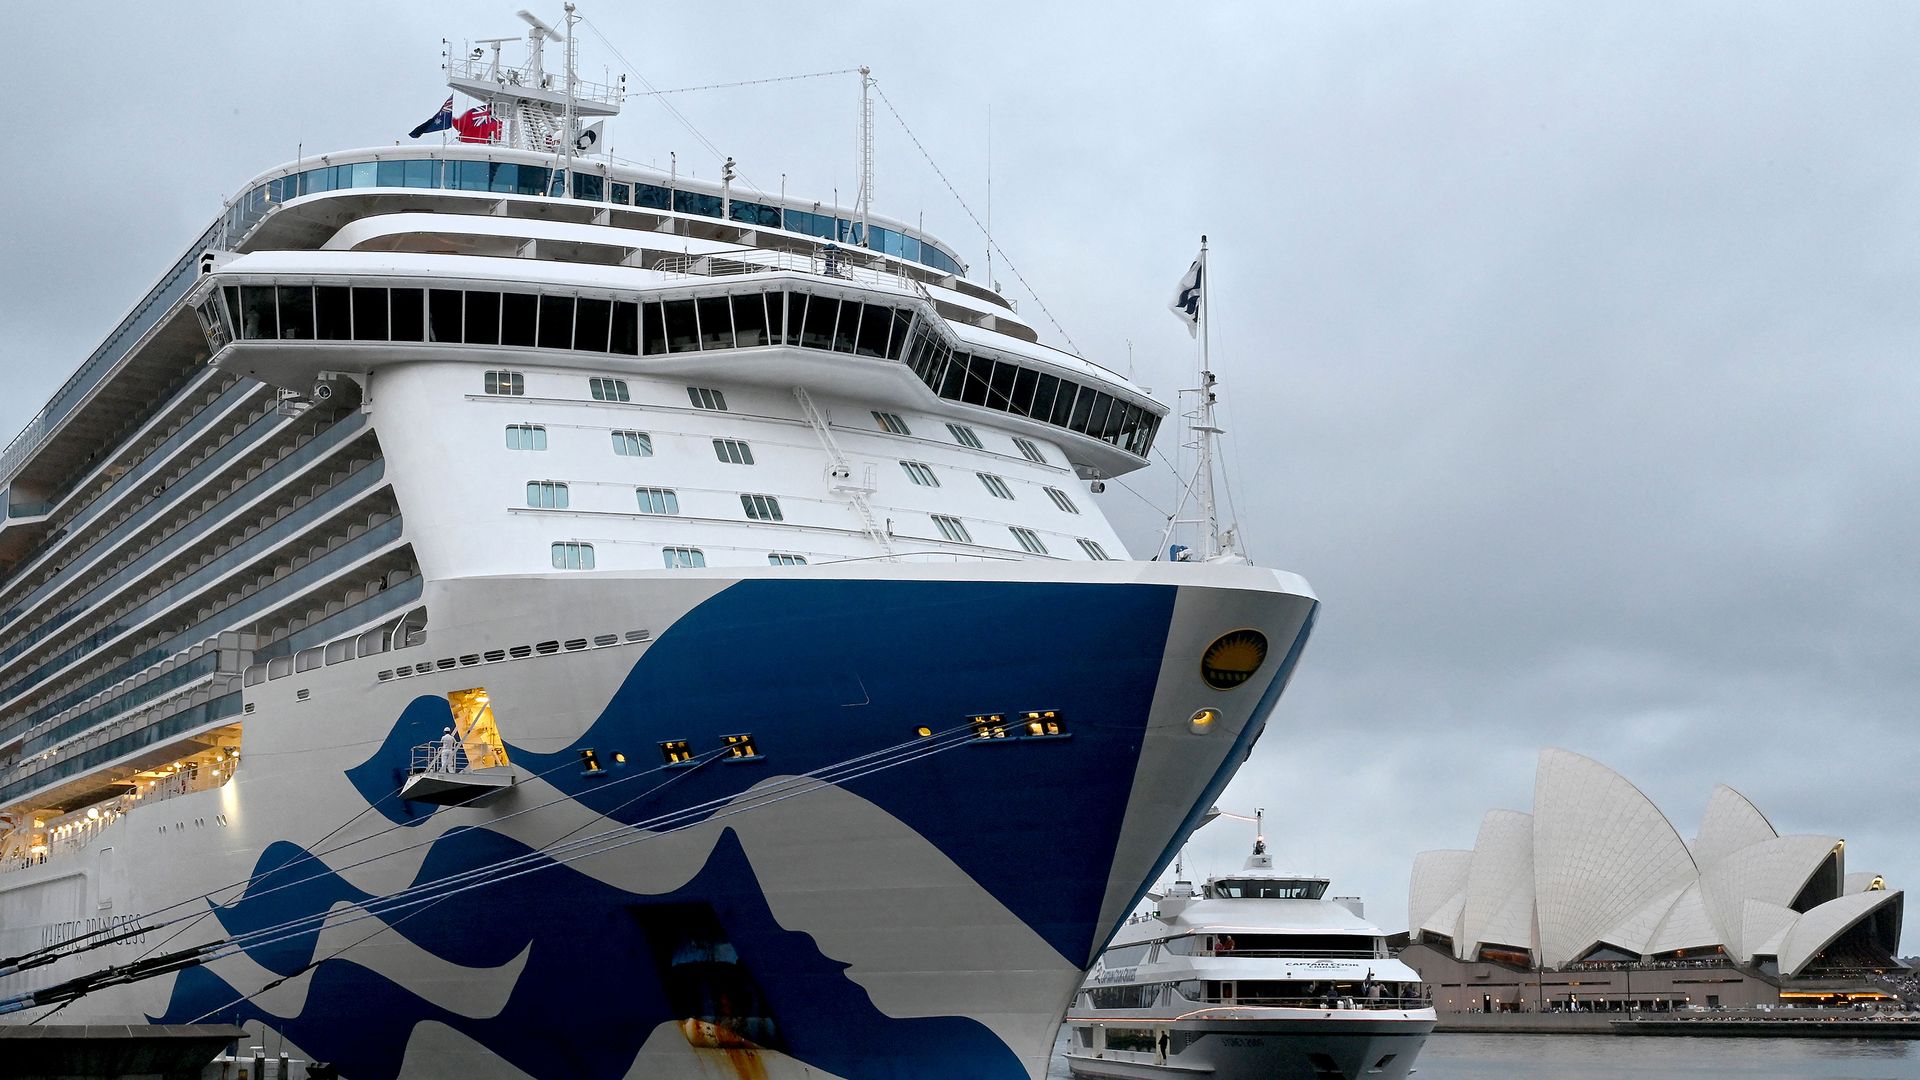 The Majestic Princess cruise ship is seen docked at the International Terminal on Circular Quay in Sydney on November 12